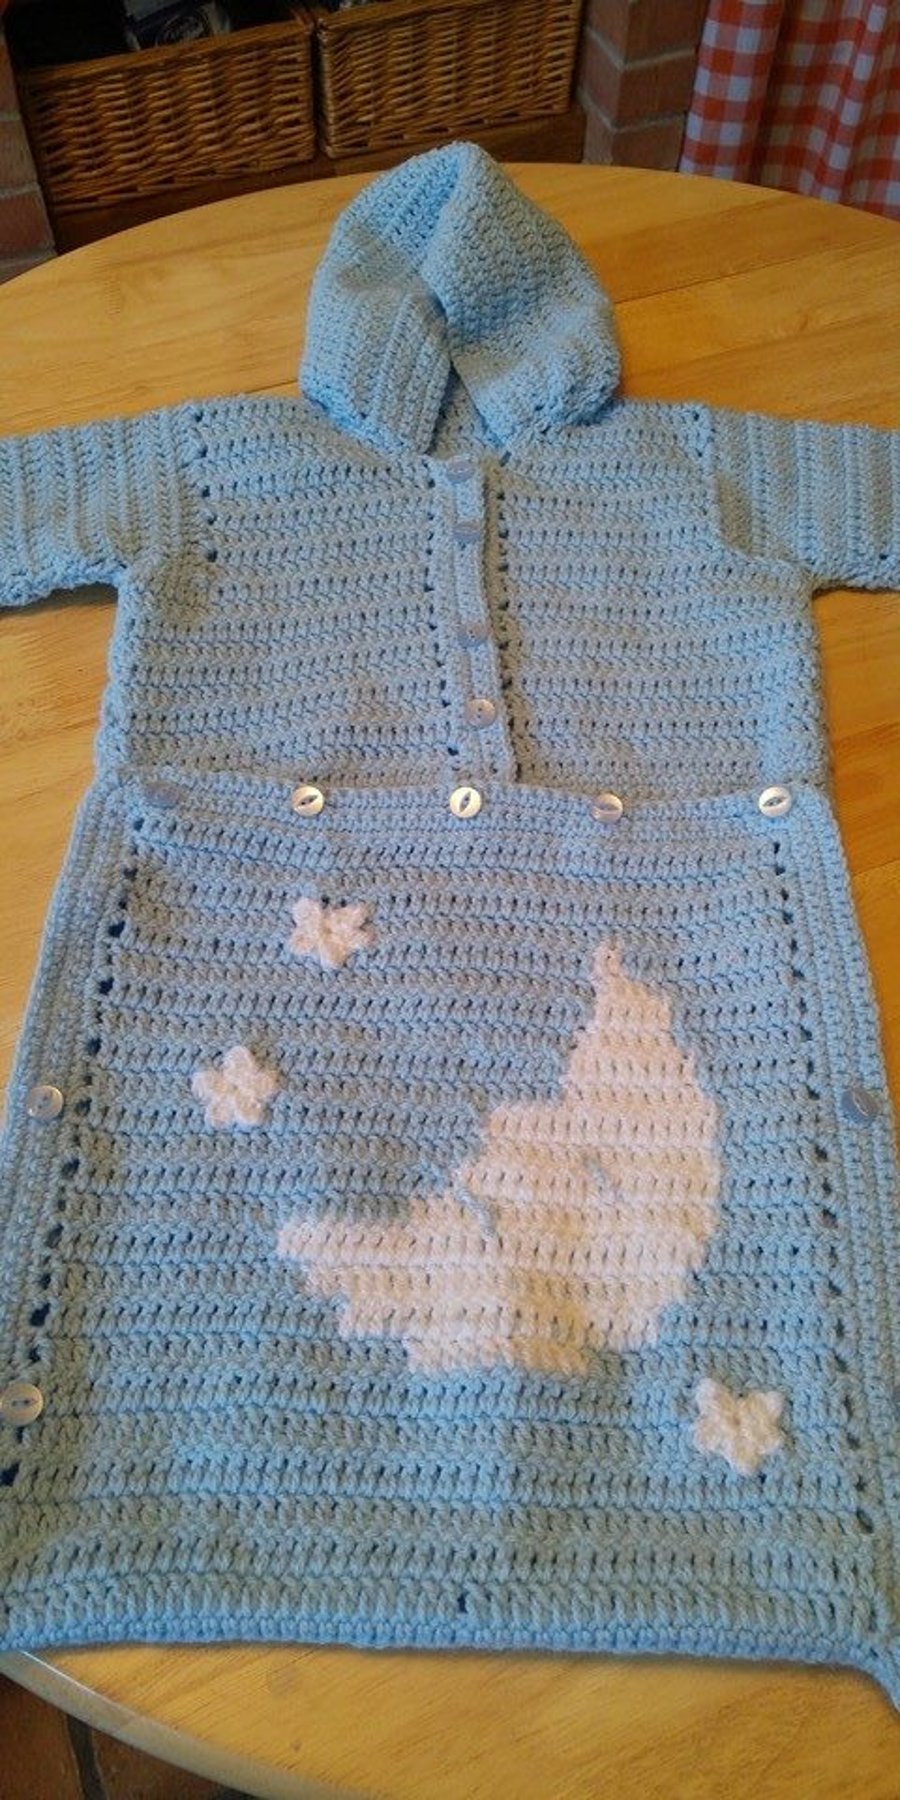 Crochet baby sleeping bag -  made and ready to go